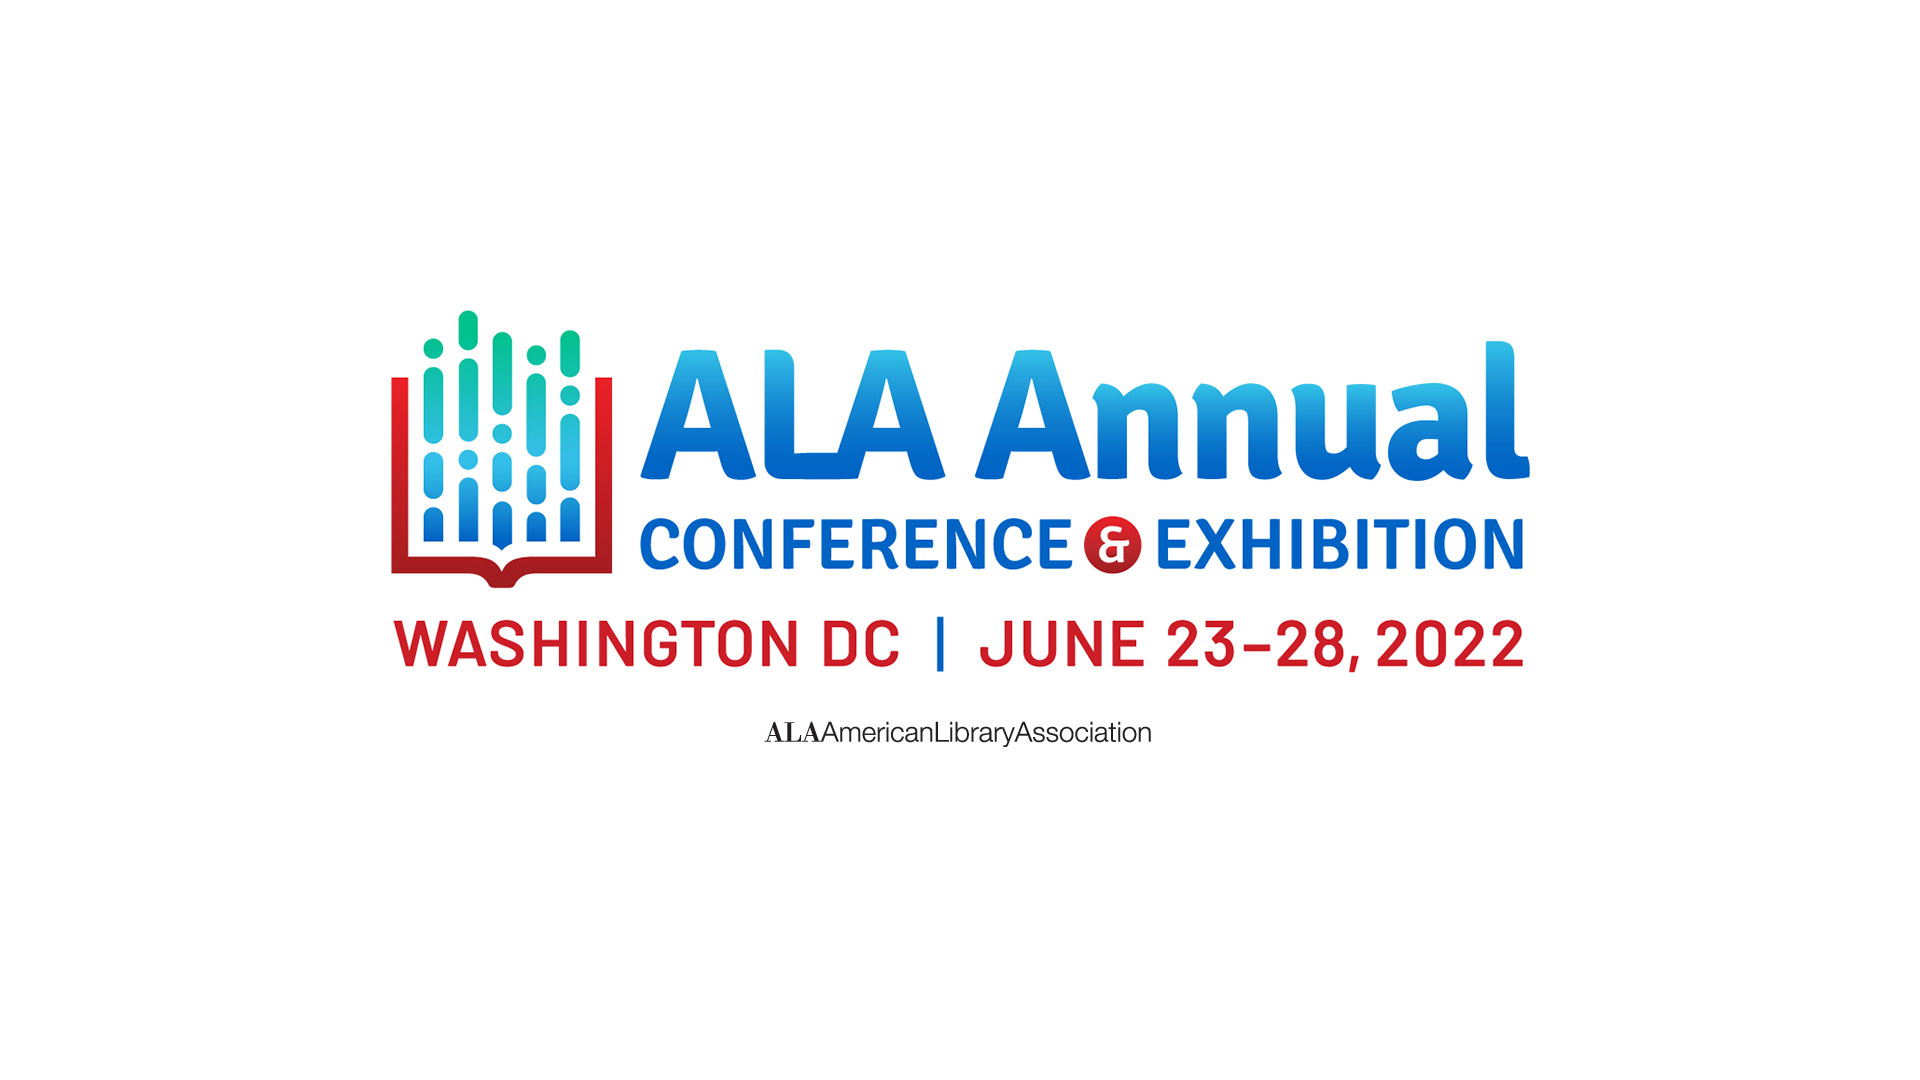 ALA Annual Conference 2022 Innovative Interfaces Inc.